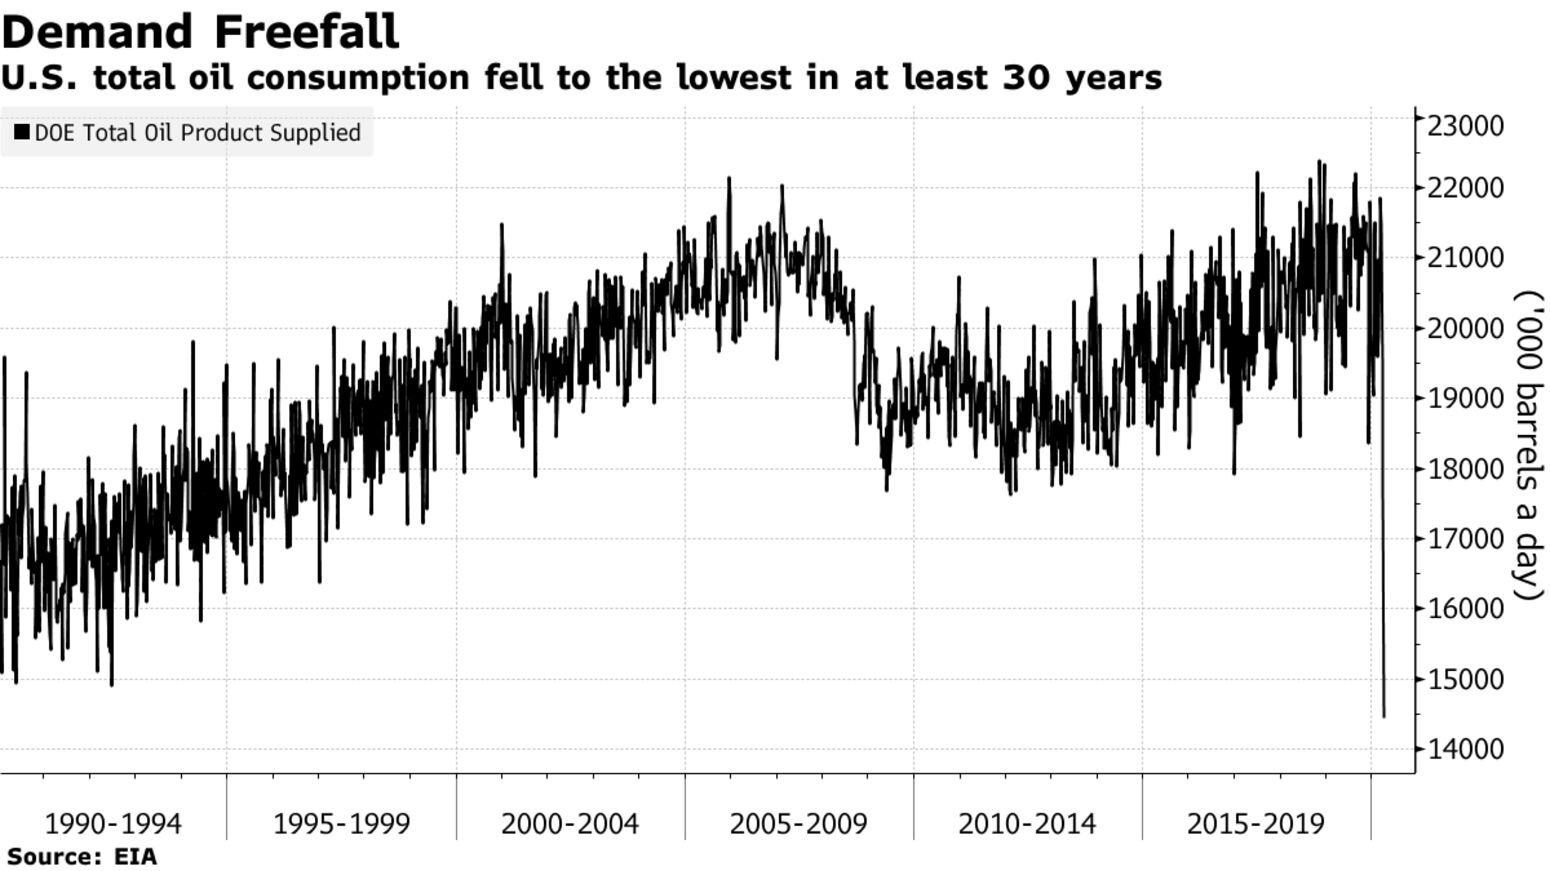 U.S. total oil consumption fell to the lowest in at least 30 years